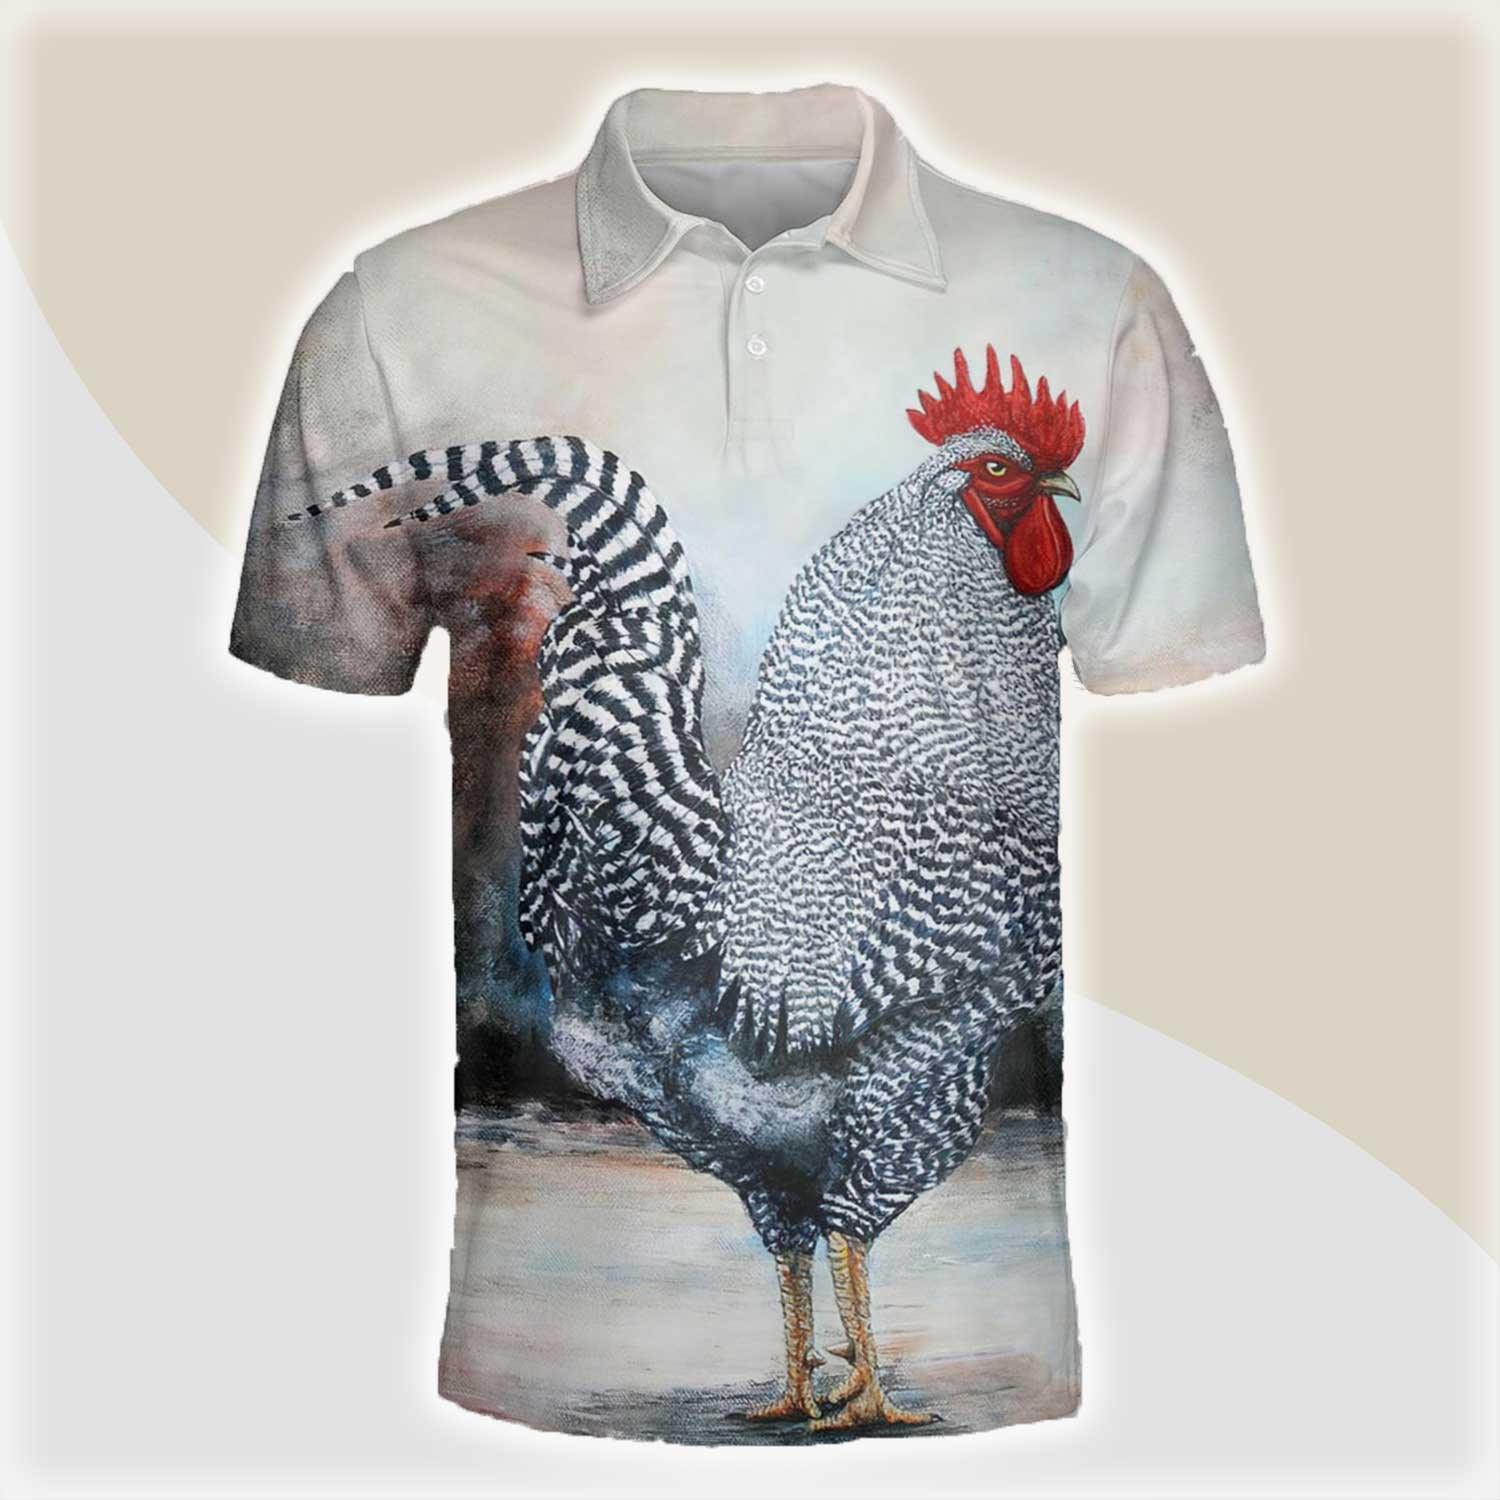 Chicken Men Polo Shirts For Summer - Cock Chicken Pattern Button Shirts For Men - Perfect Gift For Chicken Lovers, Animal Lovers - Amzanimalsgift